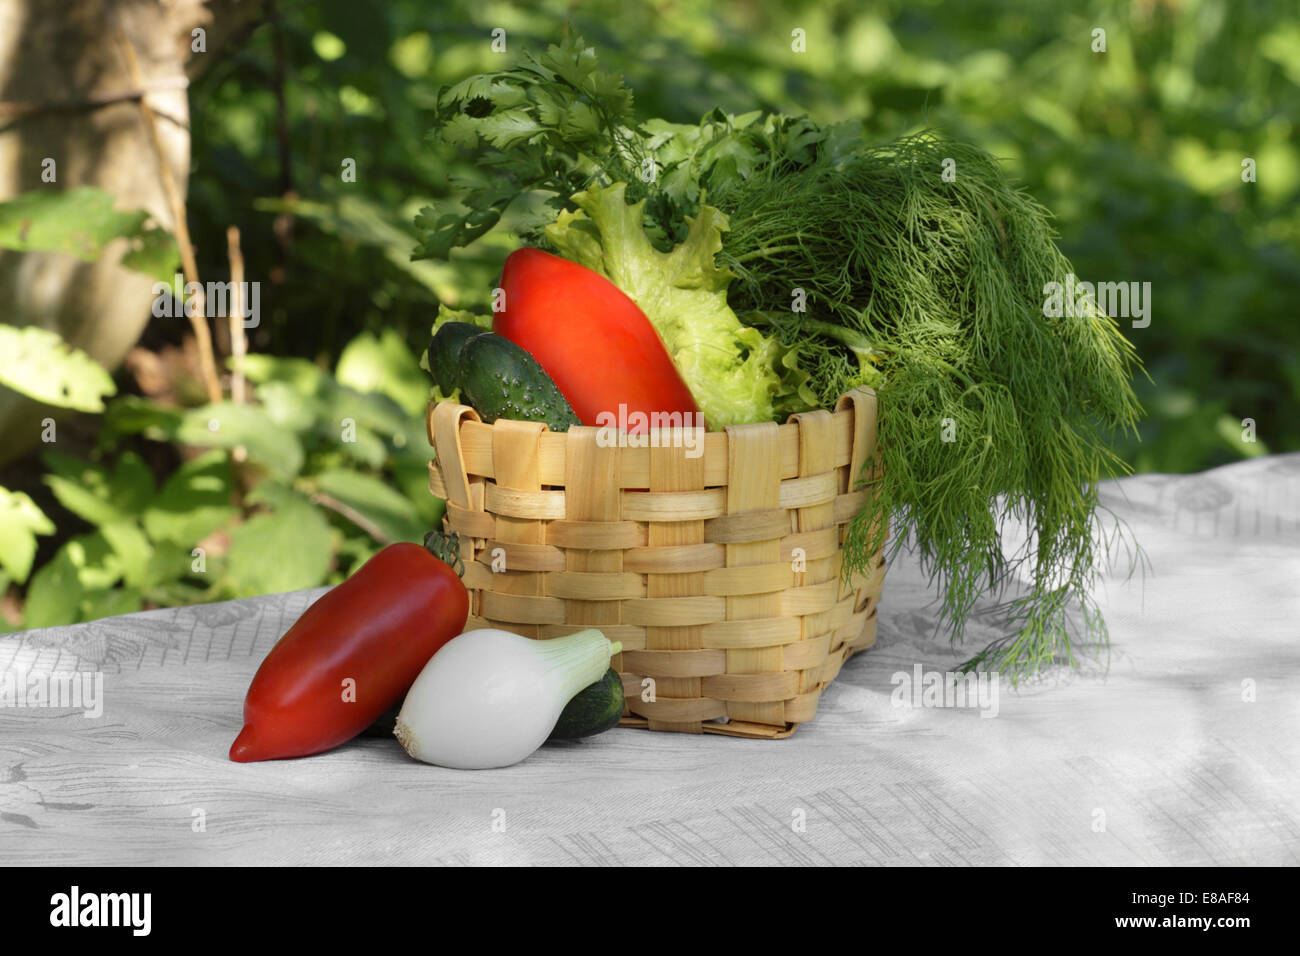 Basket with vegetables placed on table covered with tablecloth on natural background Stock Photo